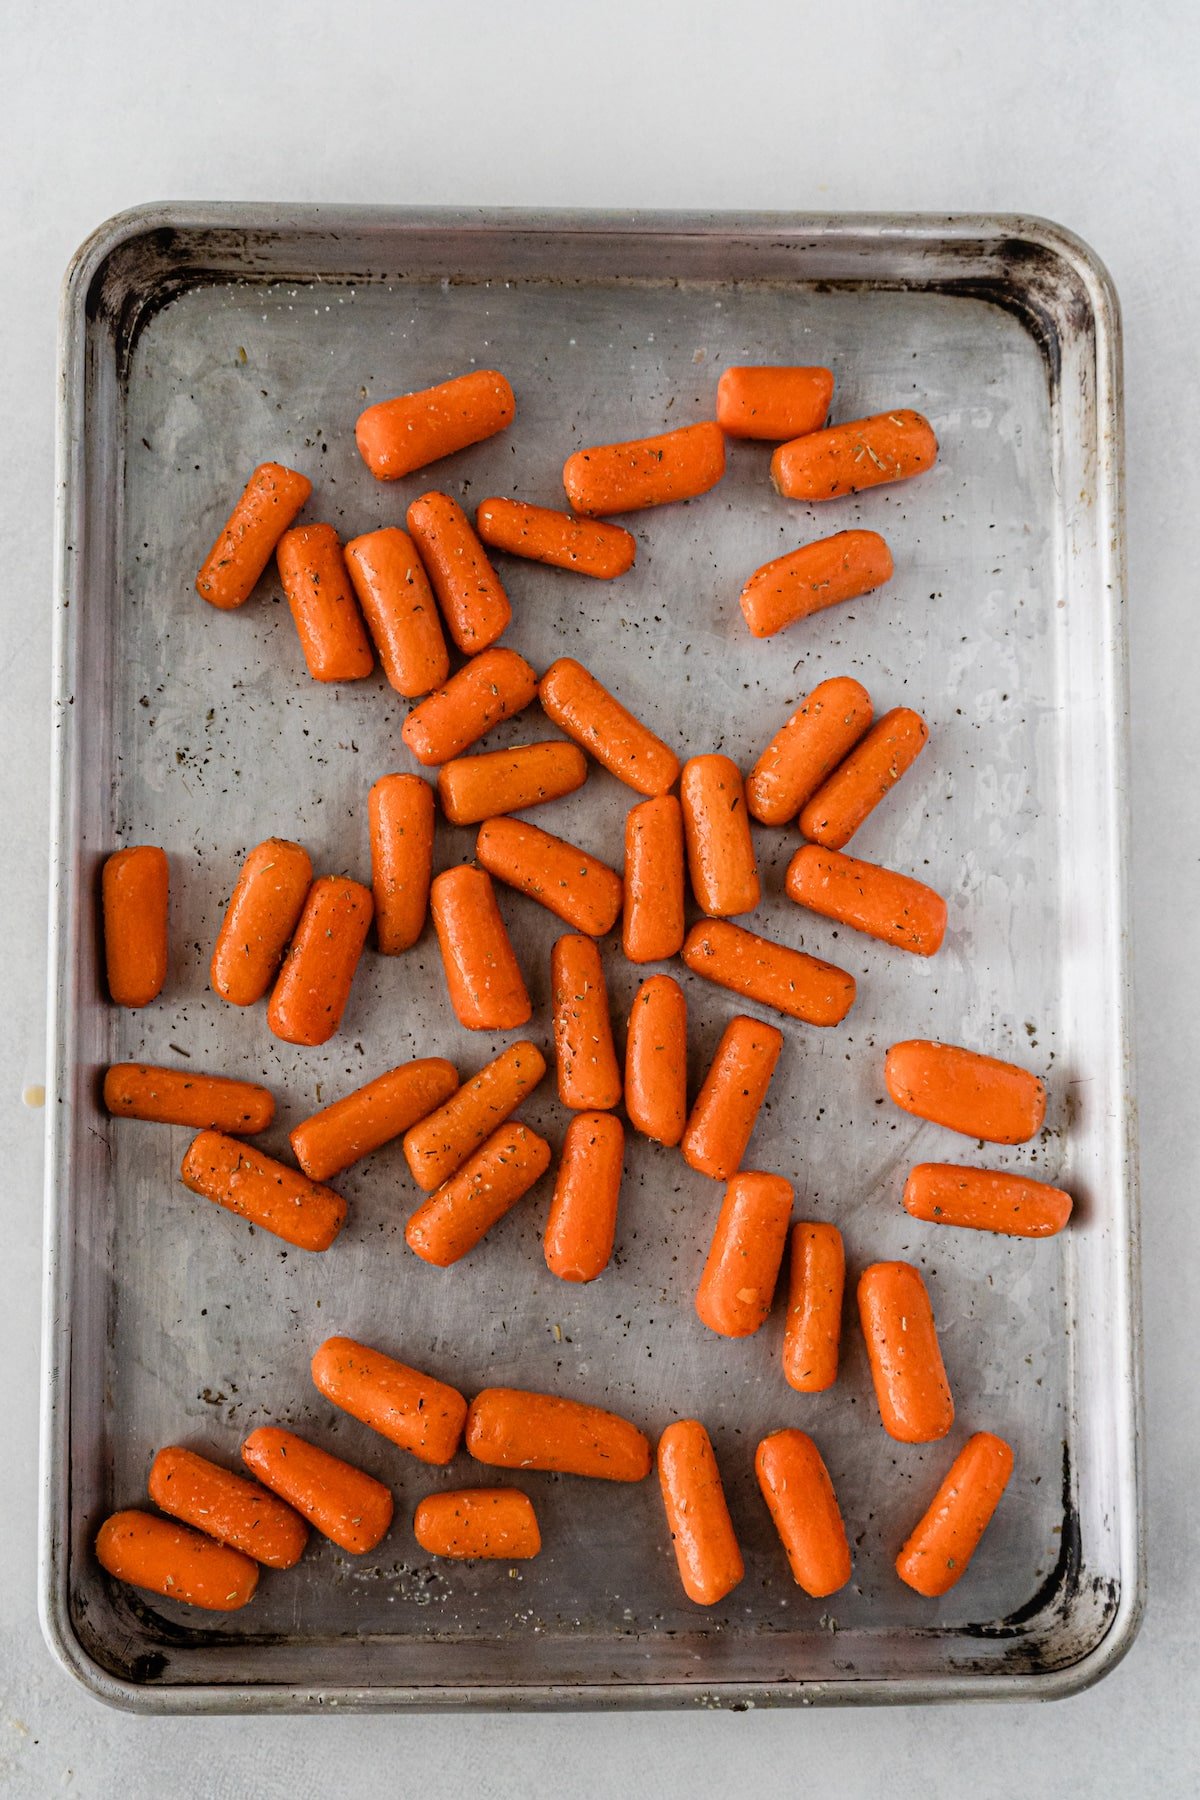 carrots tossed with spices on cookie sheet.